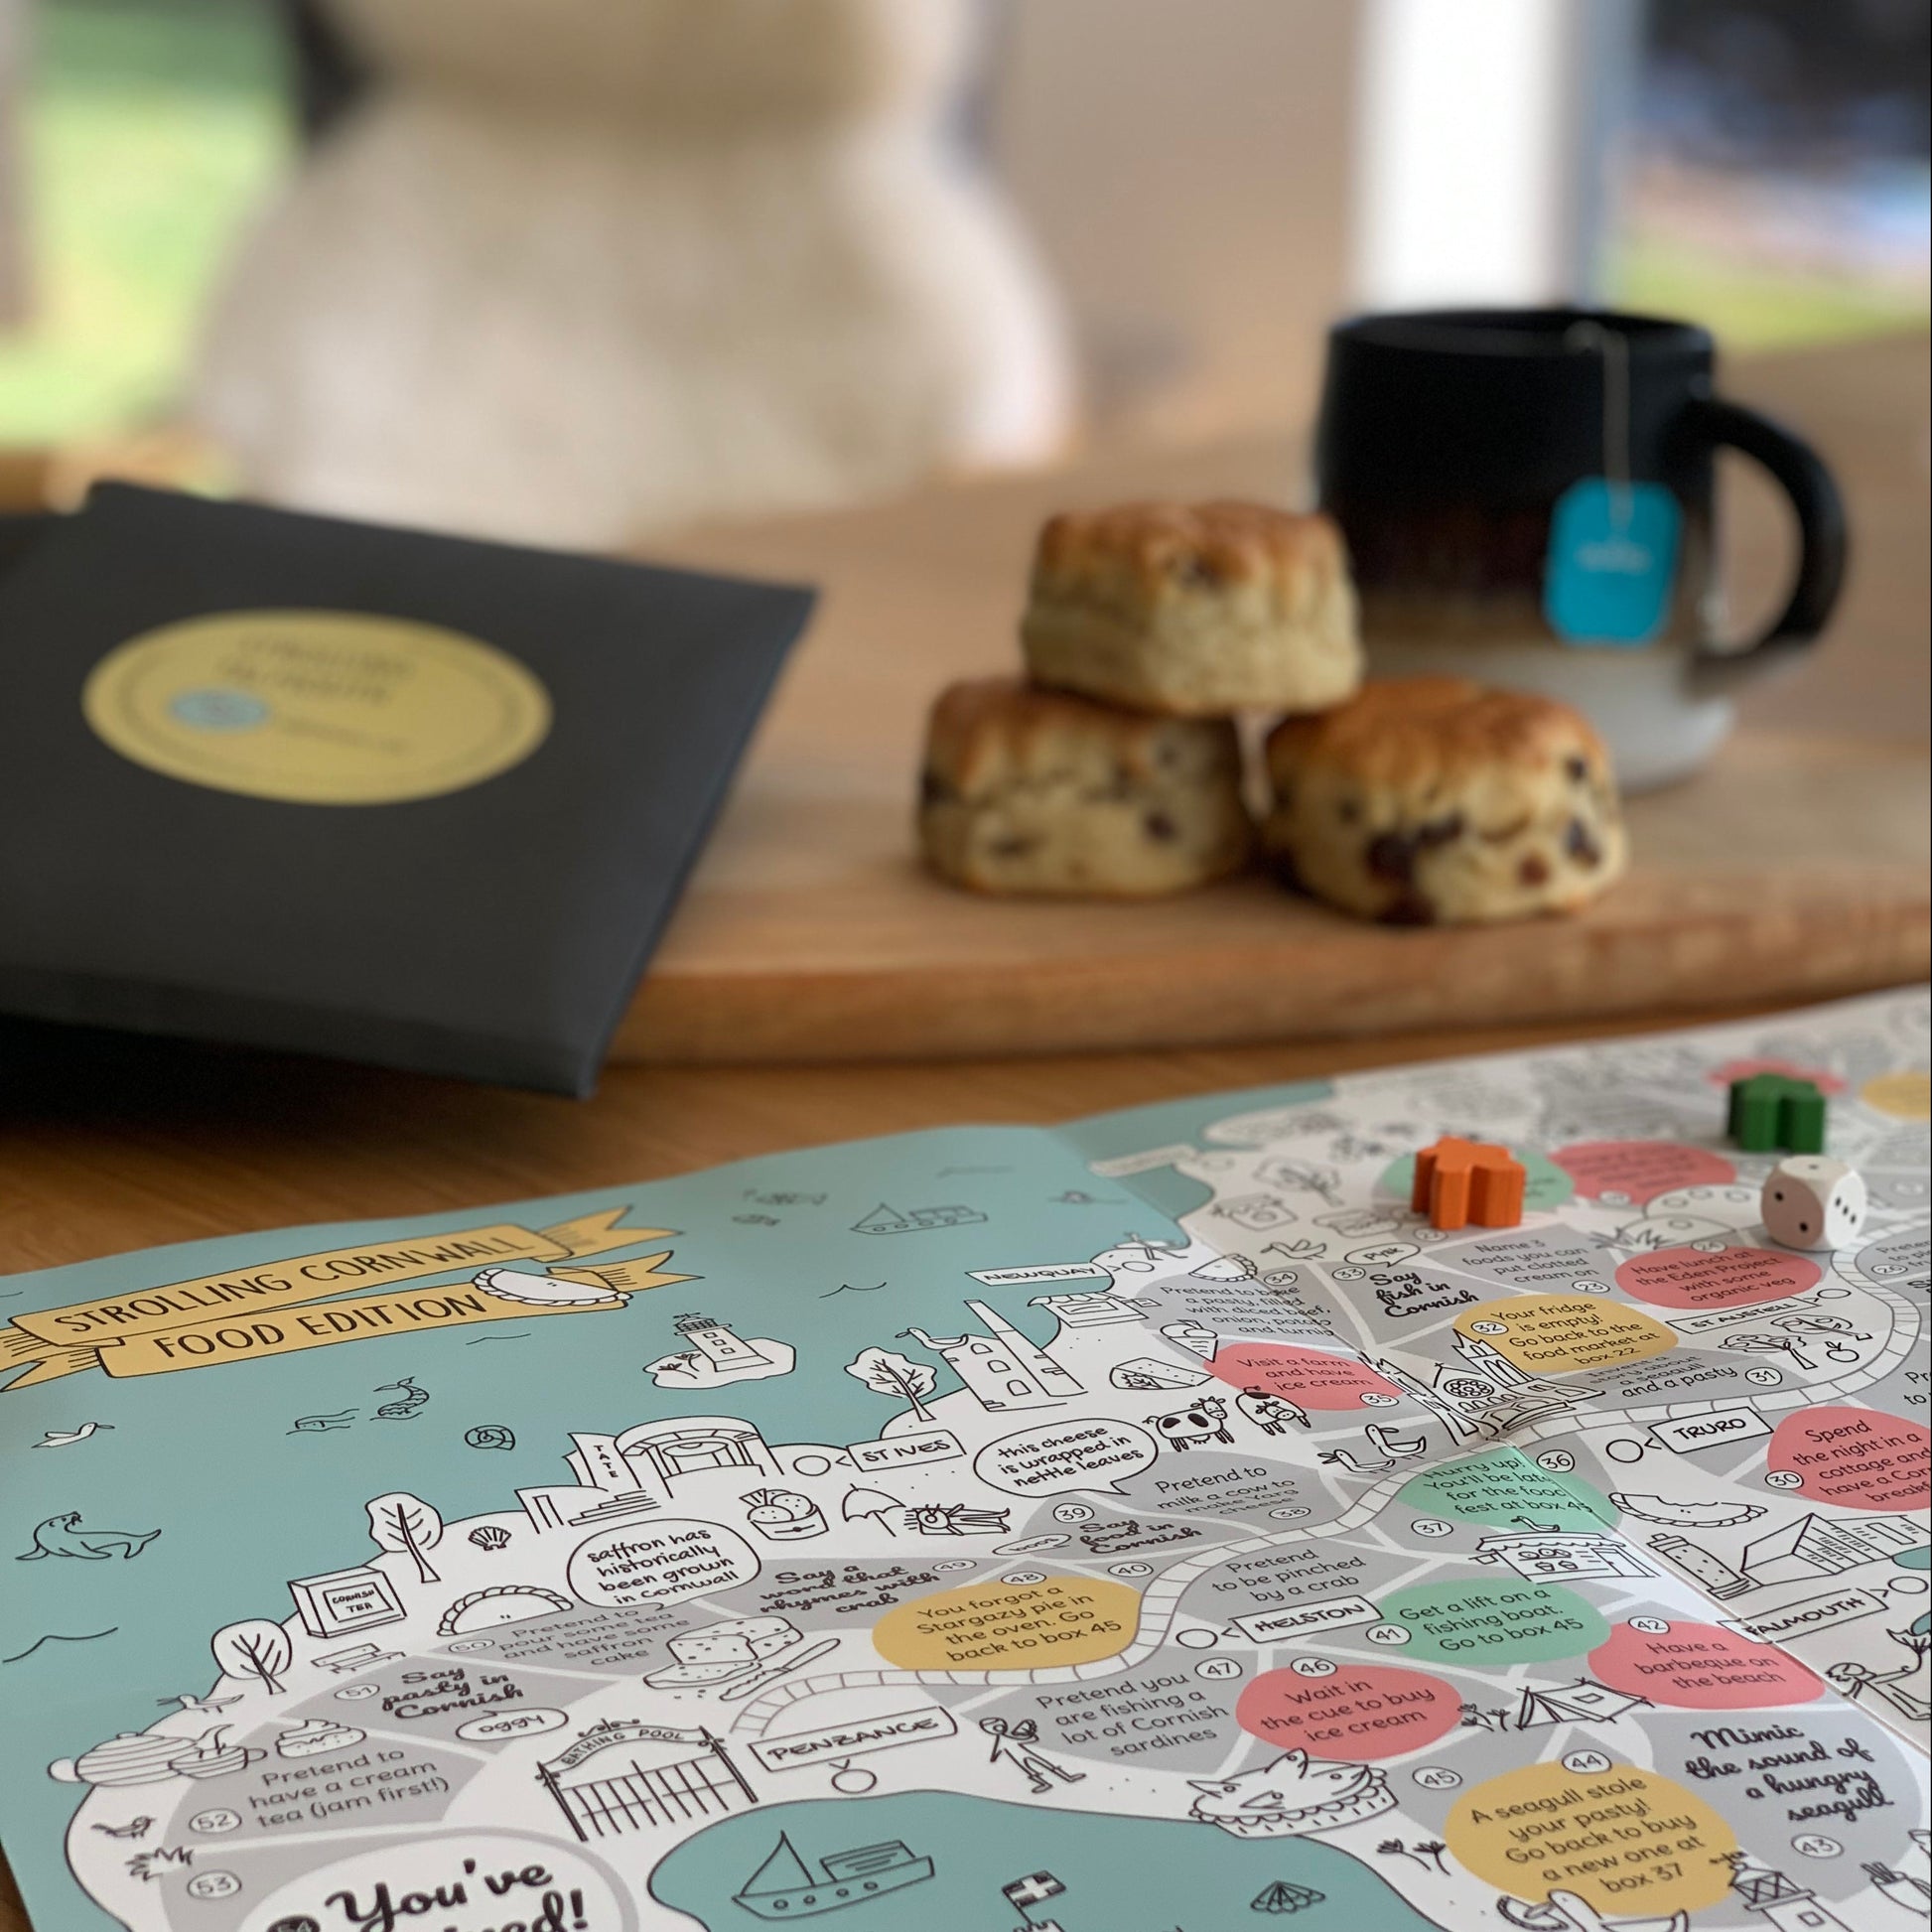 Cornwall board game food edition open on the table with wooden dice and markers. In the background some scones and Cornish cream tea.